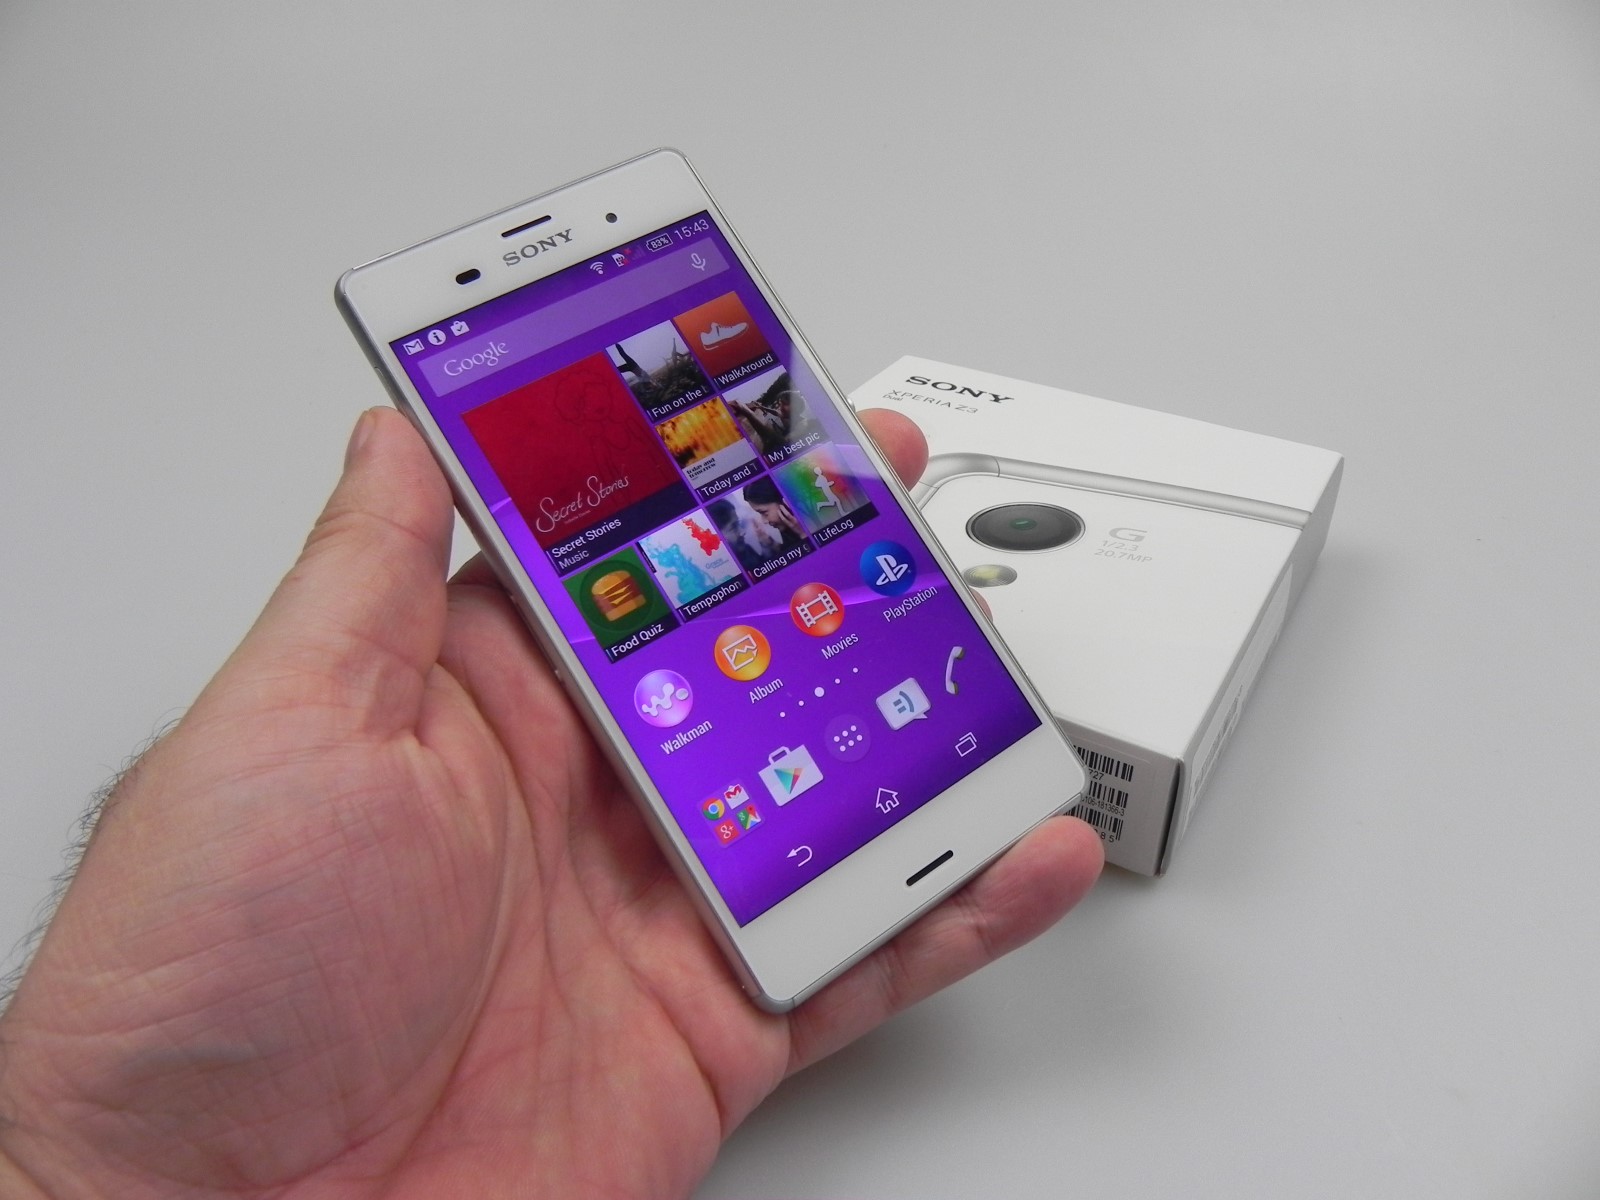 Xperia Z3 Android OS: Keeping Up With The Latest Operating System